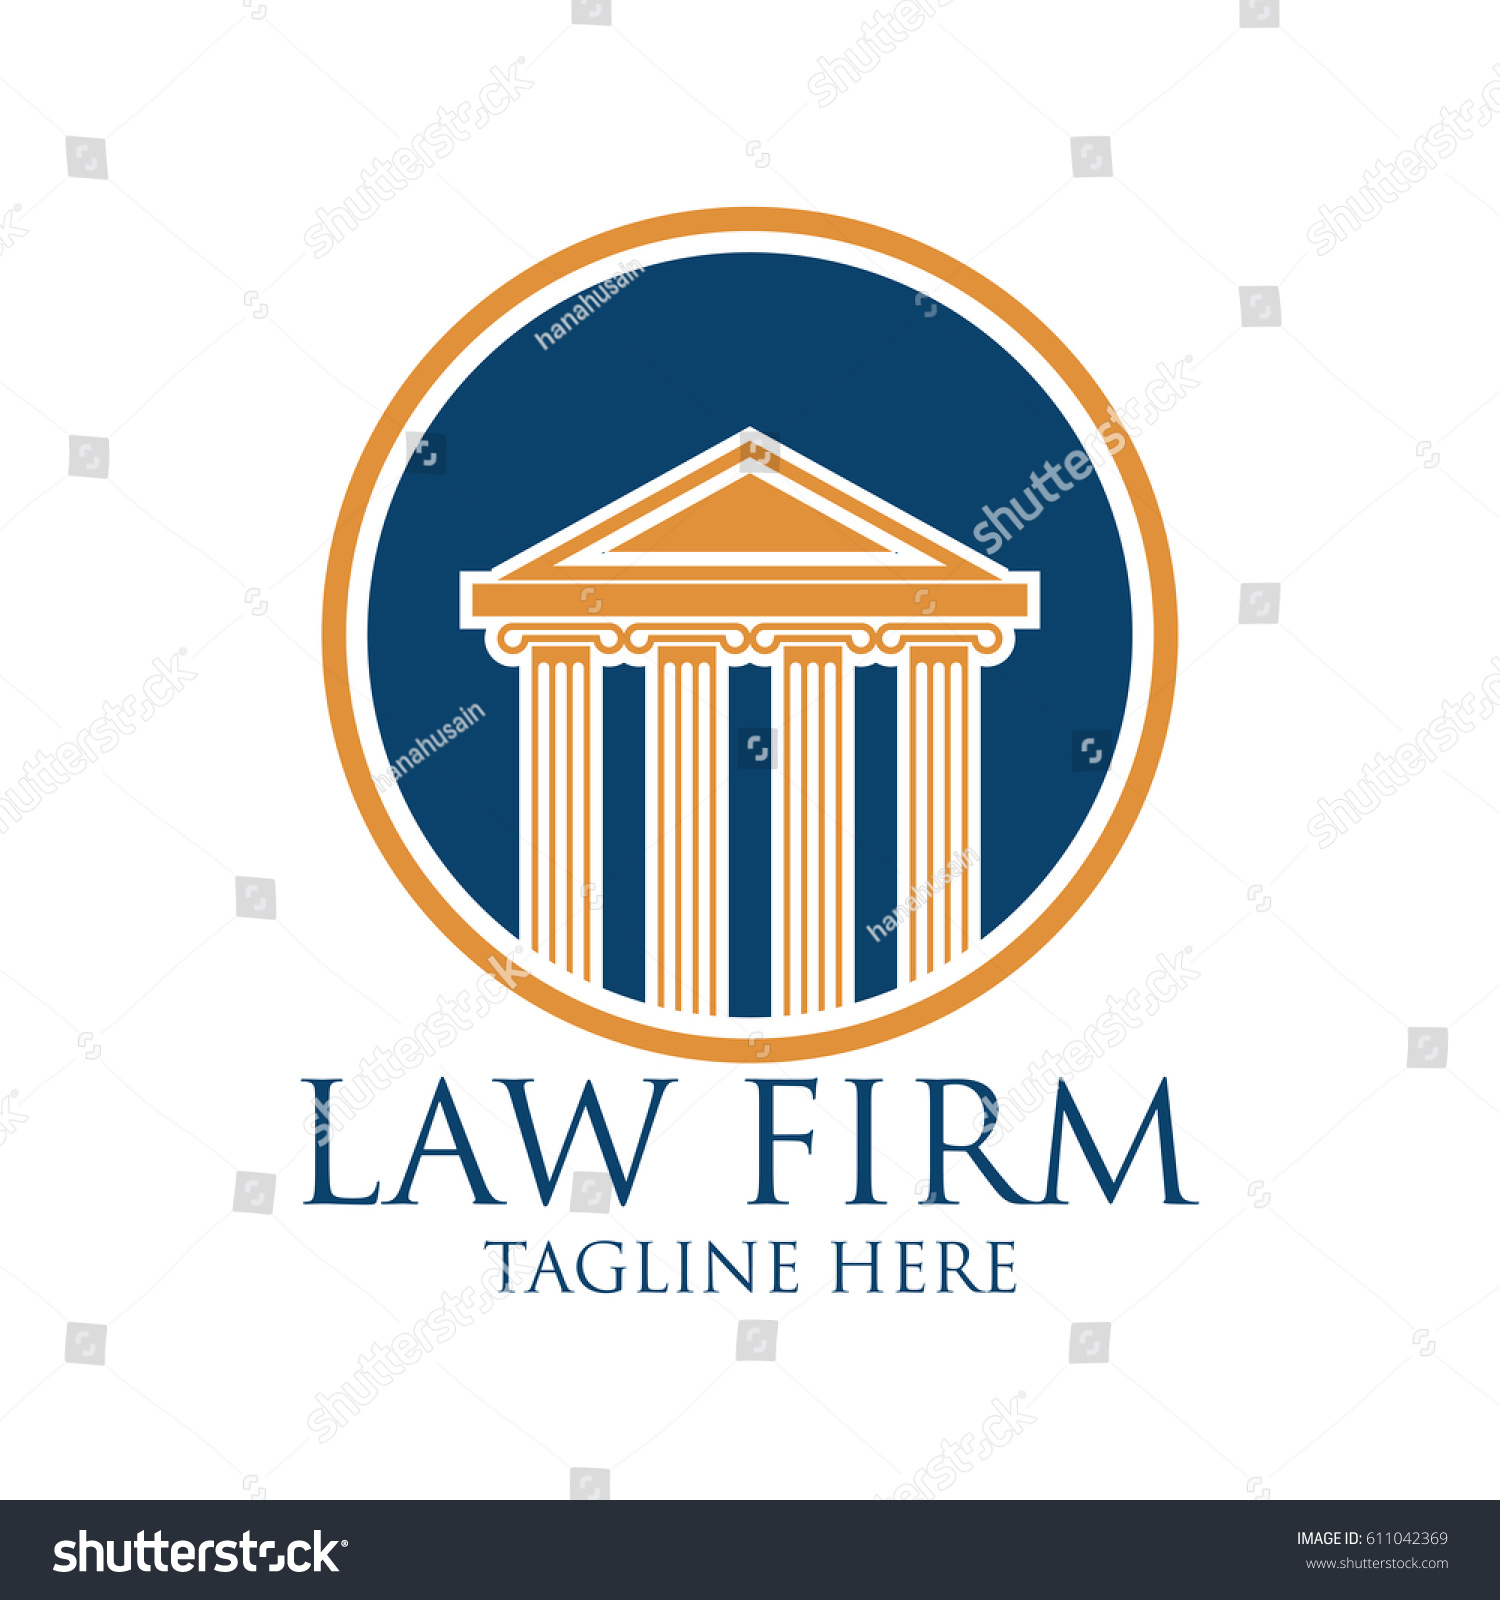 law firm logo with text space for your slogan / tagline, vector illustration #611042369